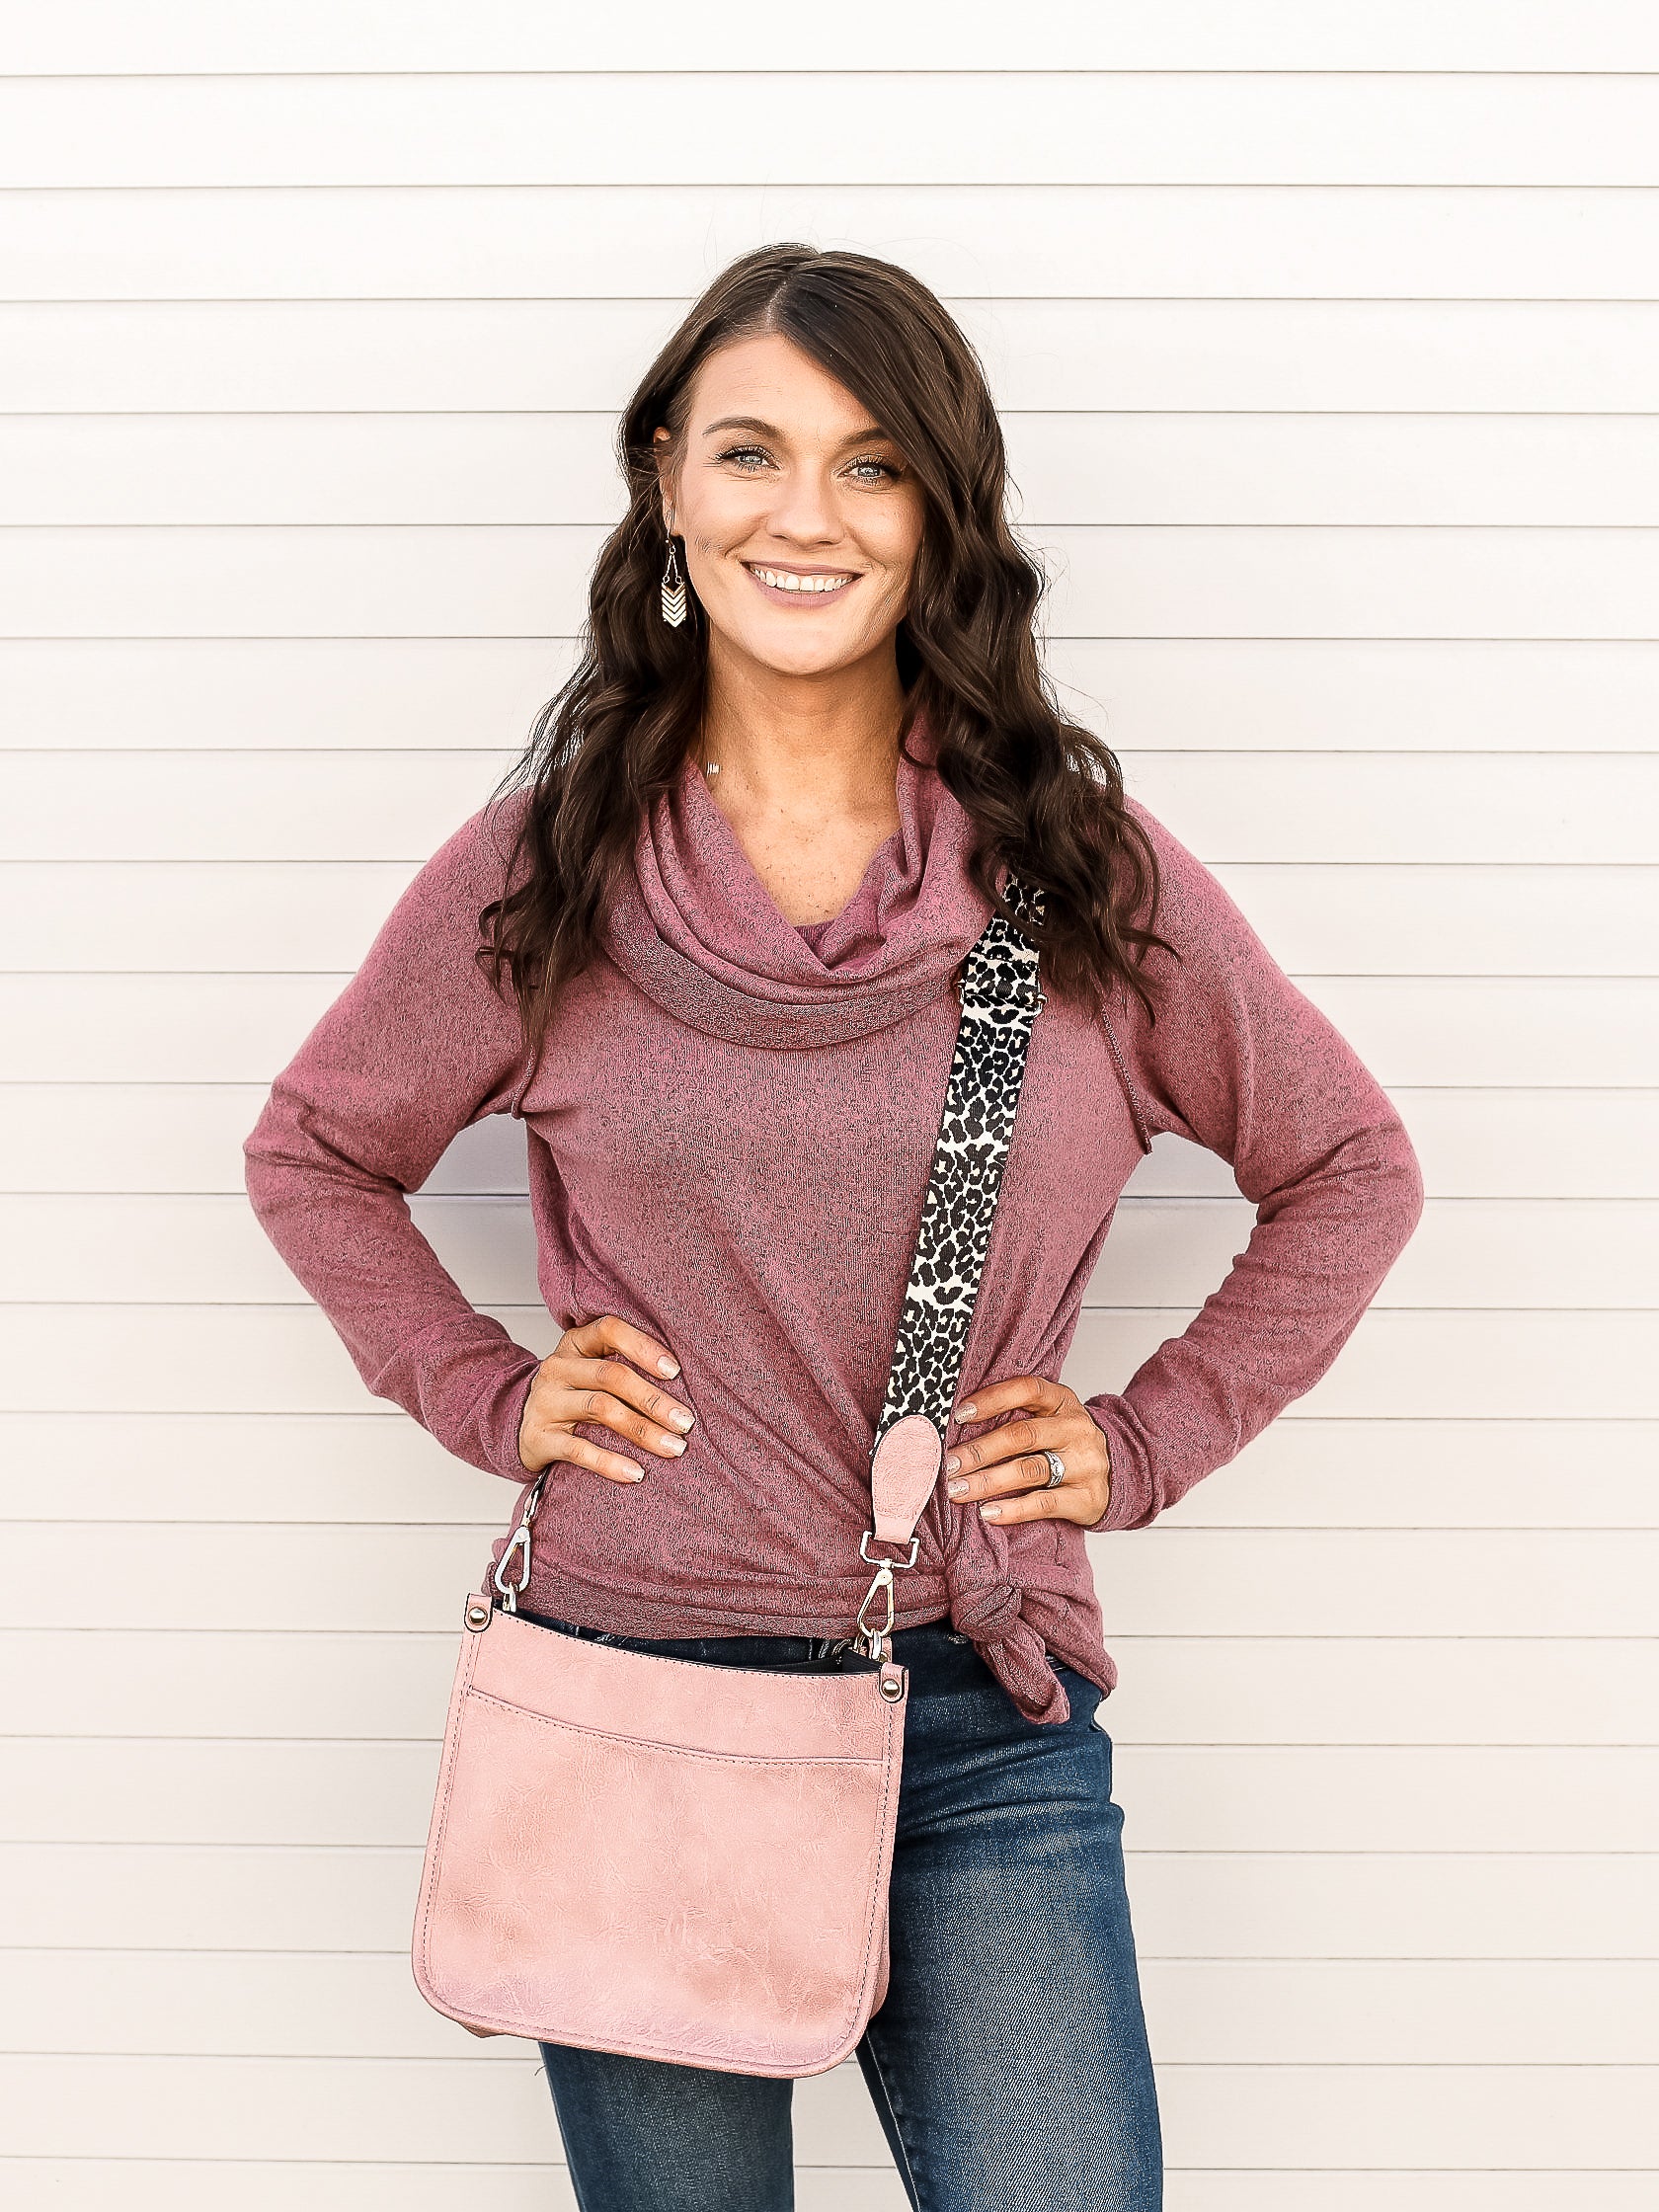 Mauve colored long sleeve top with cowl neck, styled with denim and a side knot